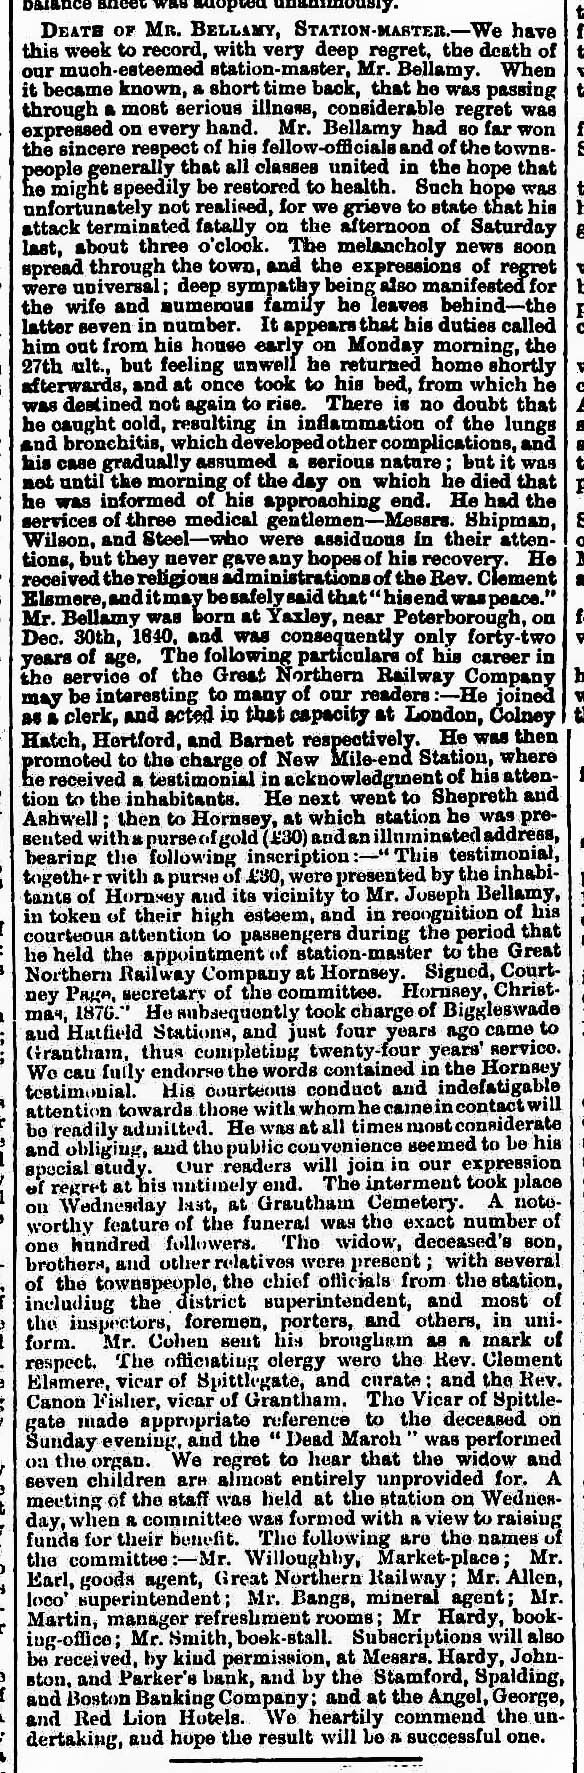 This report appeared in The Grantham Journal on 8th April 1882. From The British Newspaper Archive http://www.britishnewspaperarchive.co.uk/ Image © THE BRITISH LIBRARY BOARD. ALL RIGHTS RESERVED.